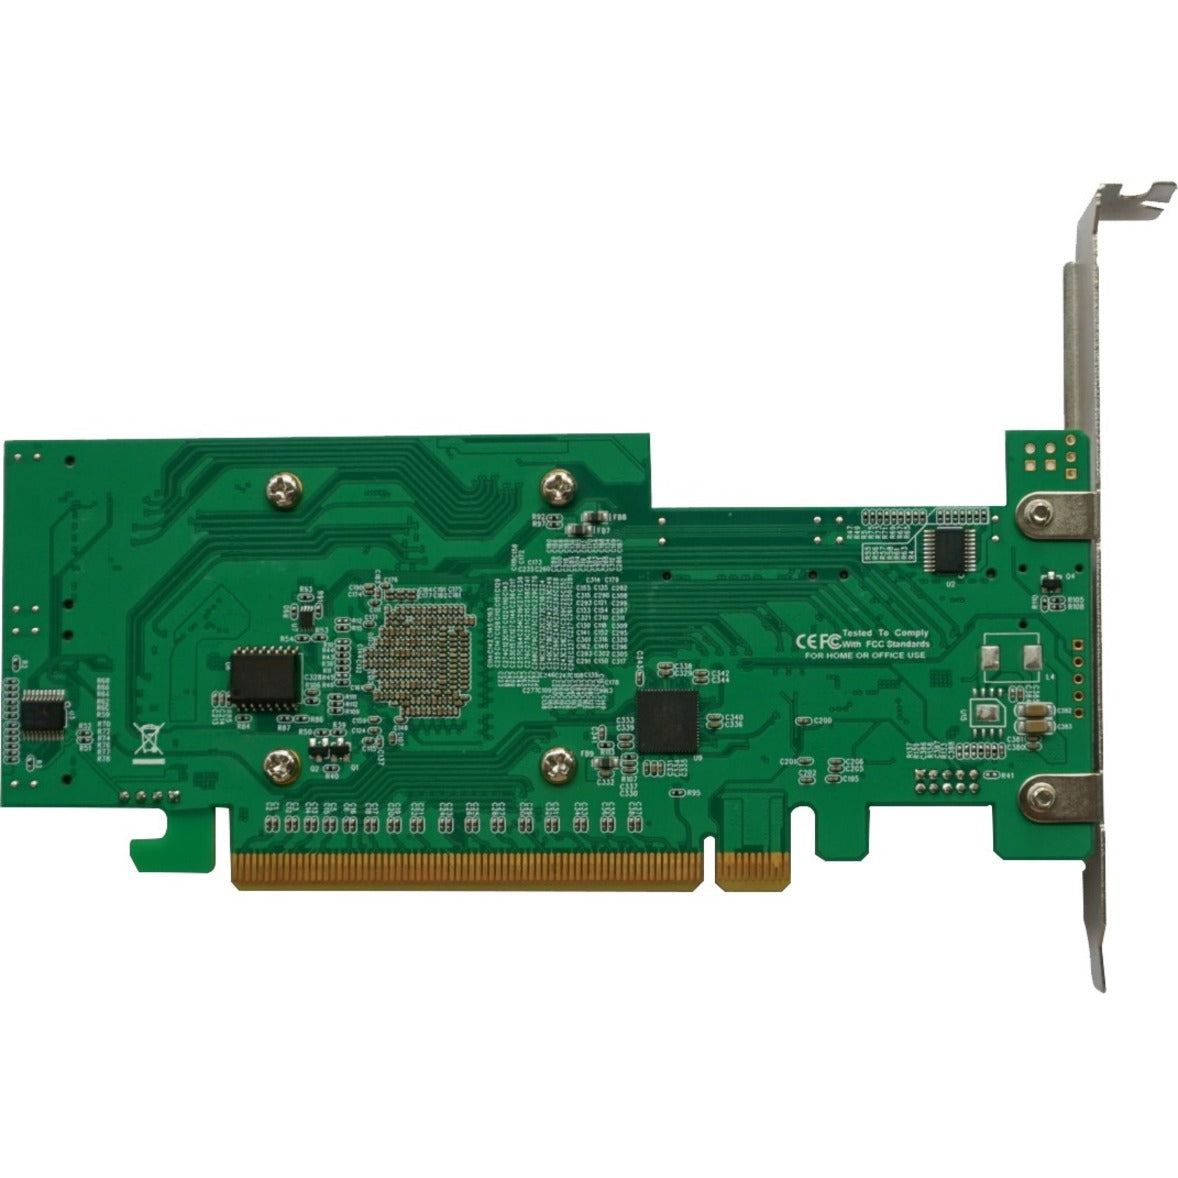 HighPoint SSD7580A NVMe Controller, PCIe 4.0 x16 RAID Controller for High-Speed Storage